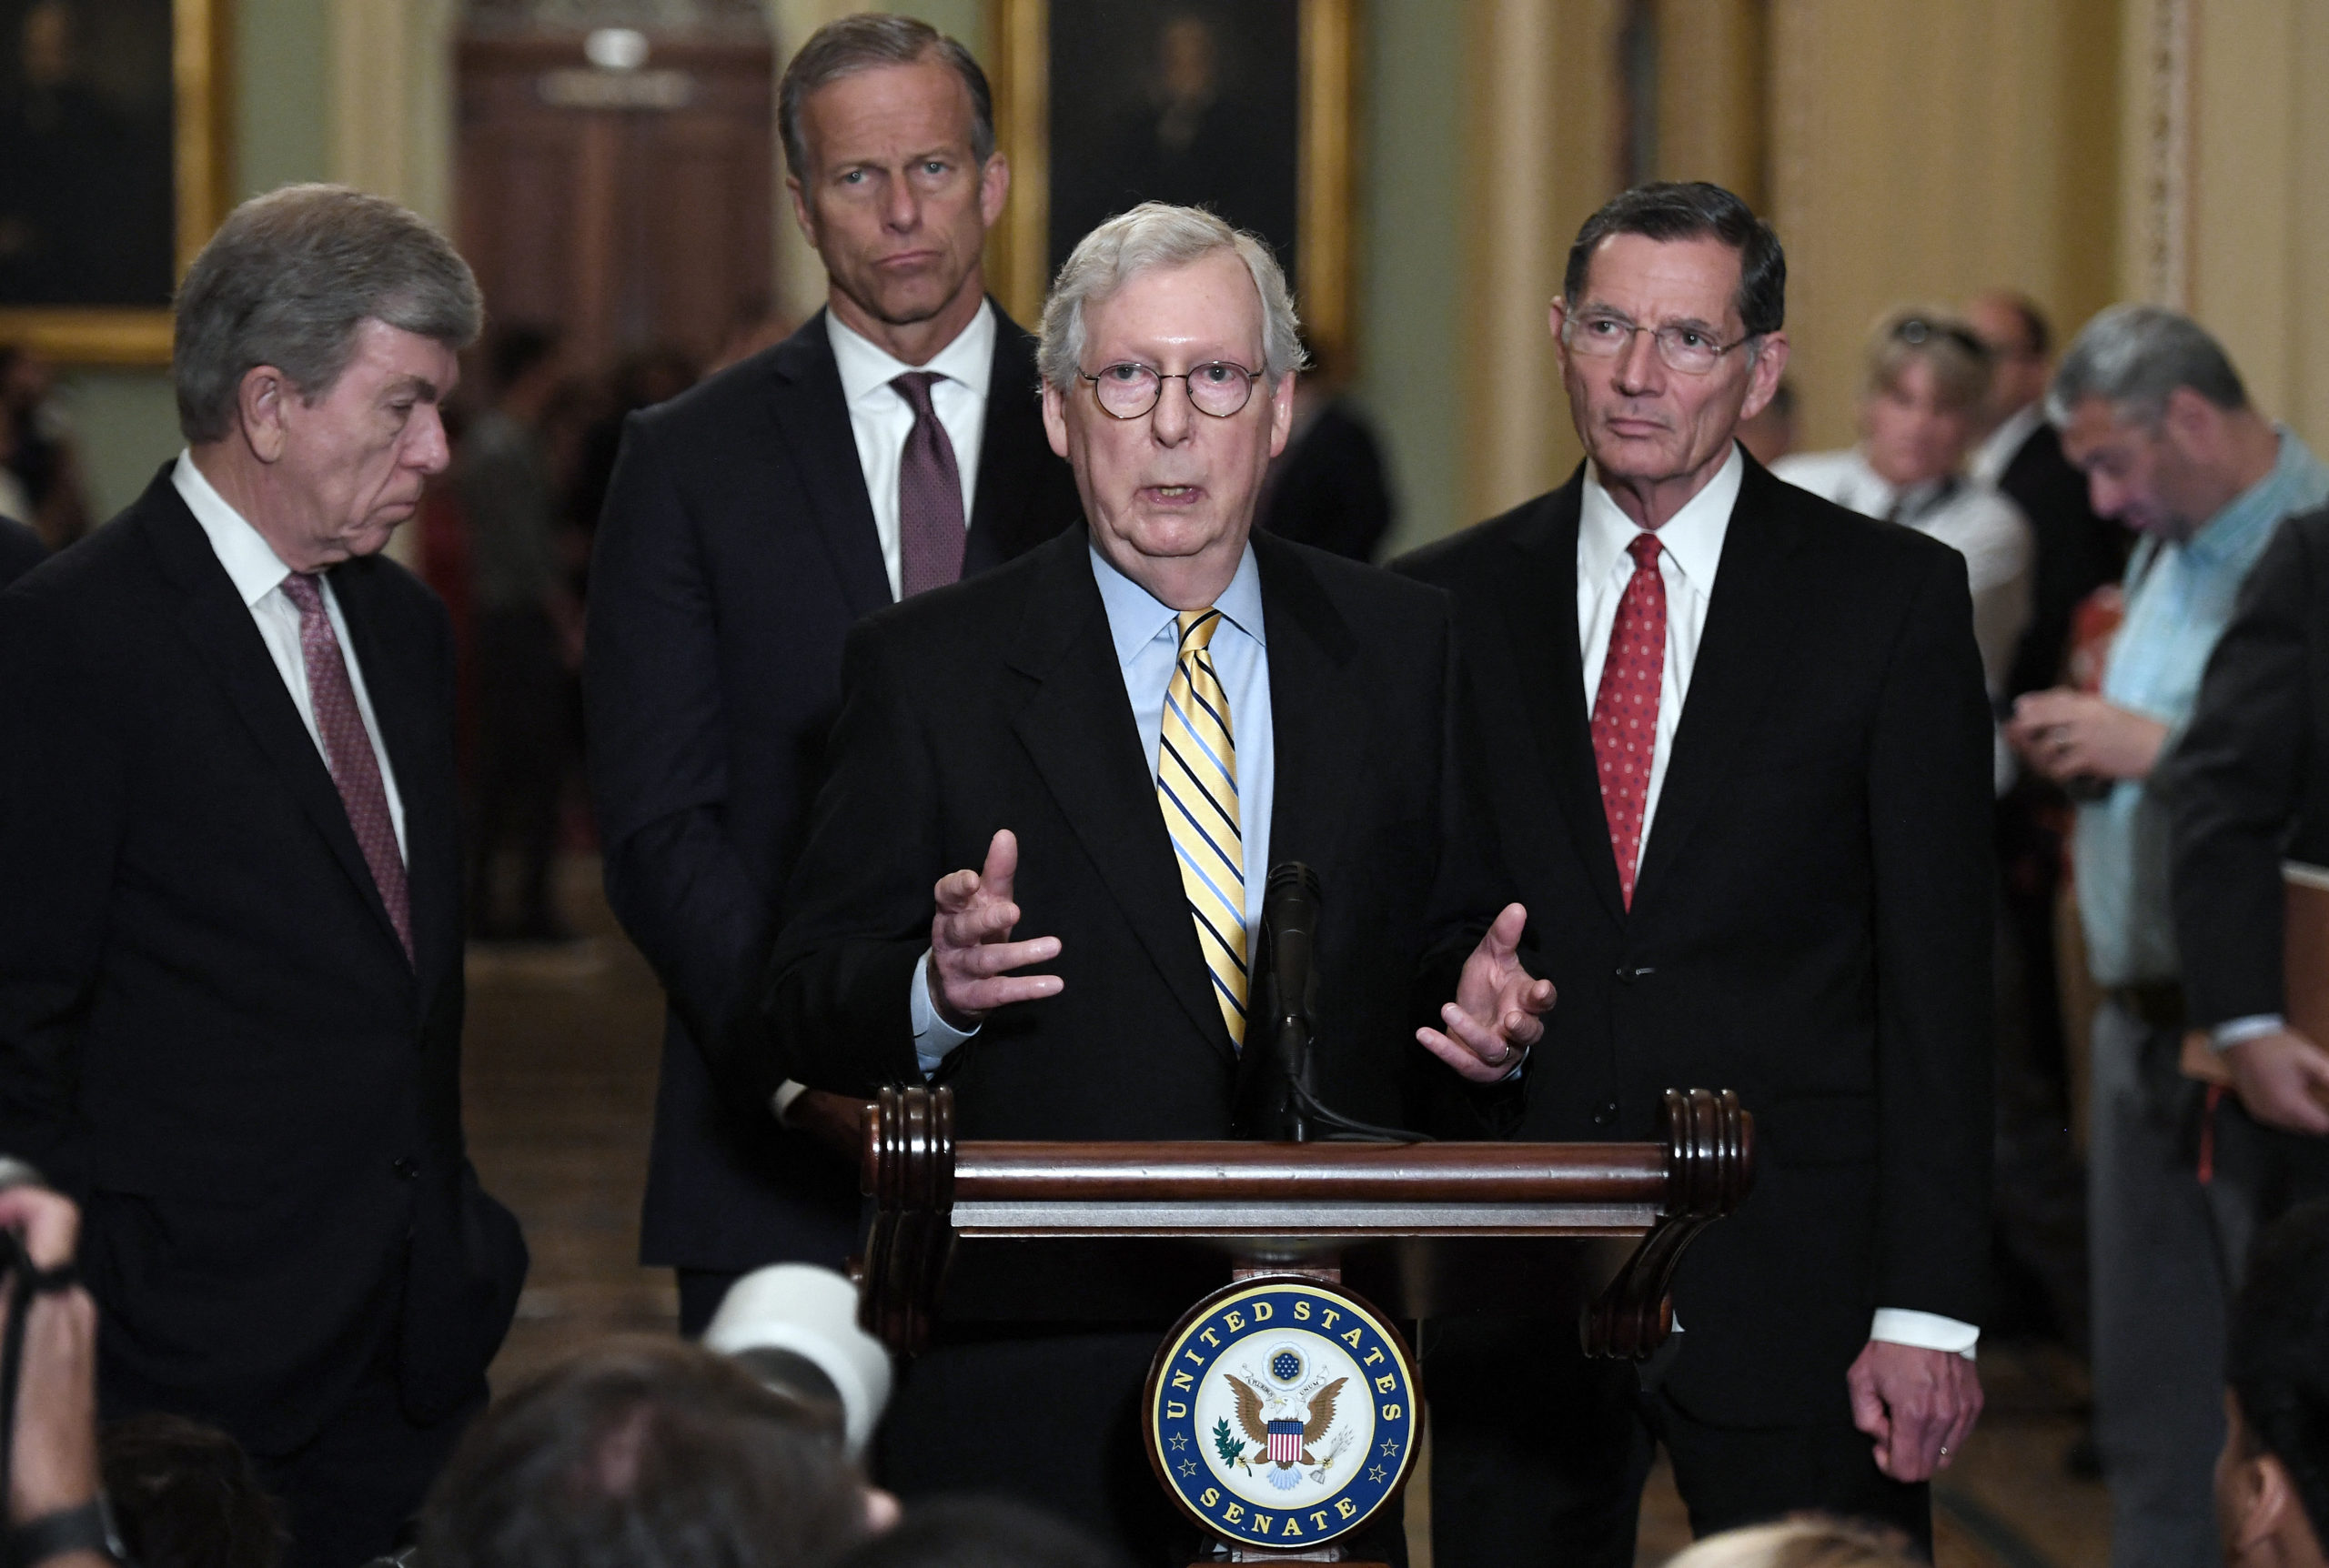 Sen. Mitch McConnell speaks about S.1 ahead of Tuesday's vote. (OLIVIER DOULIERY/AFP via Getty Images)